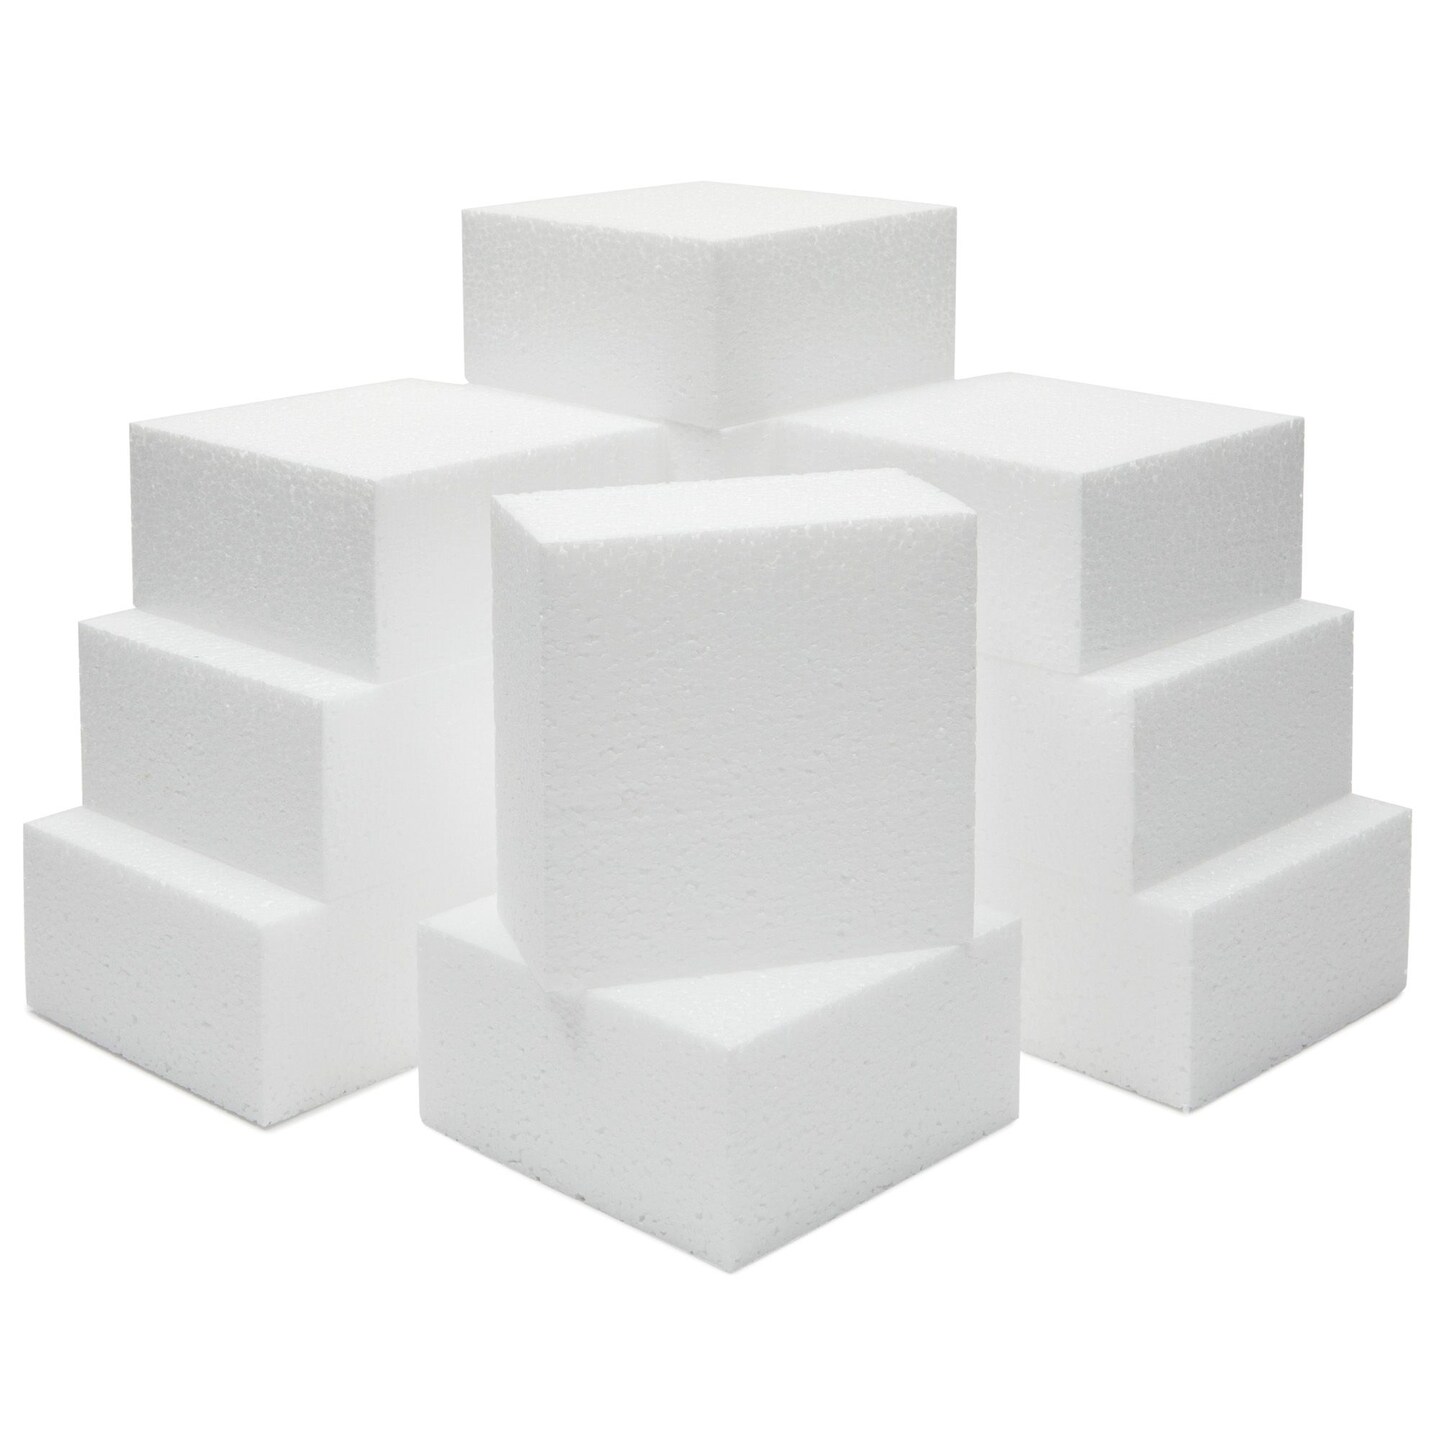 3 Pack Craft Foam Blocks for DIY, 2 Inch Thick Rectangle Bricks for  Carving, Sculpture, Art (11x17 in)